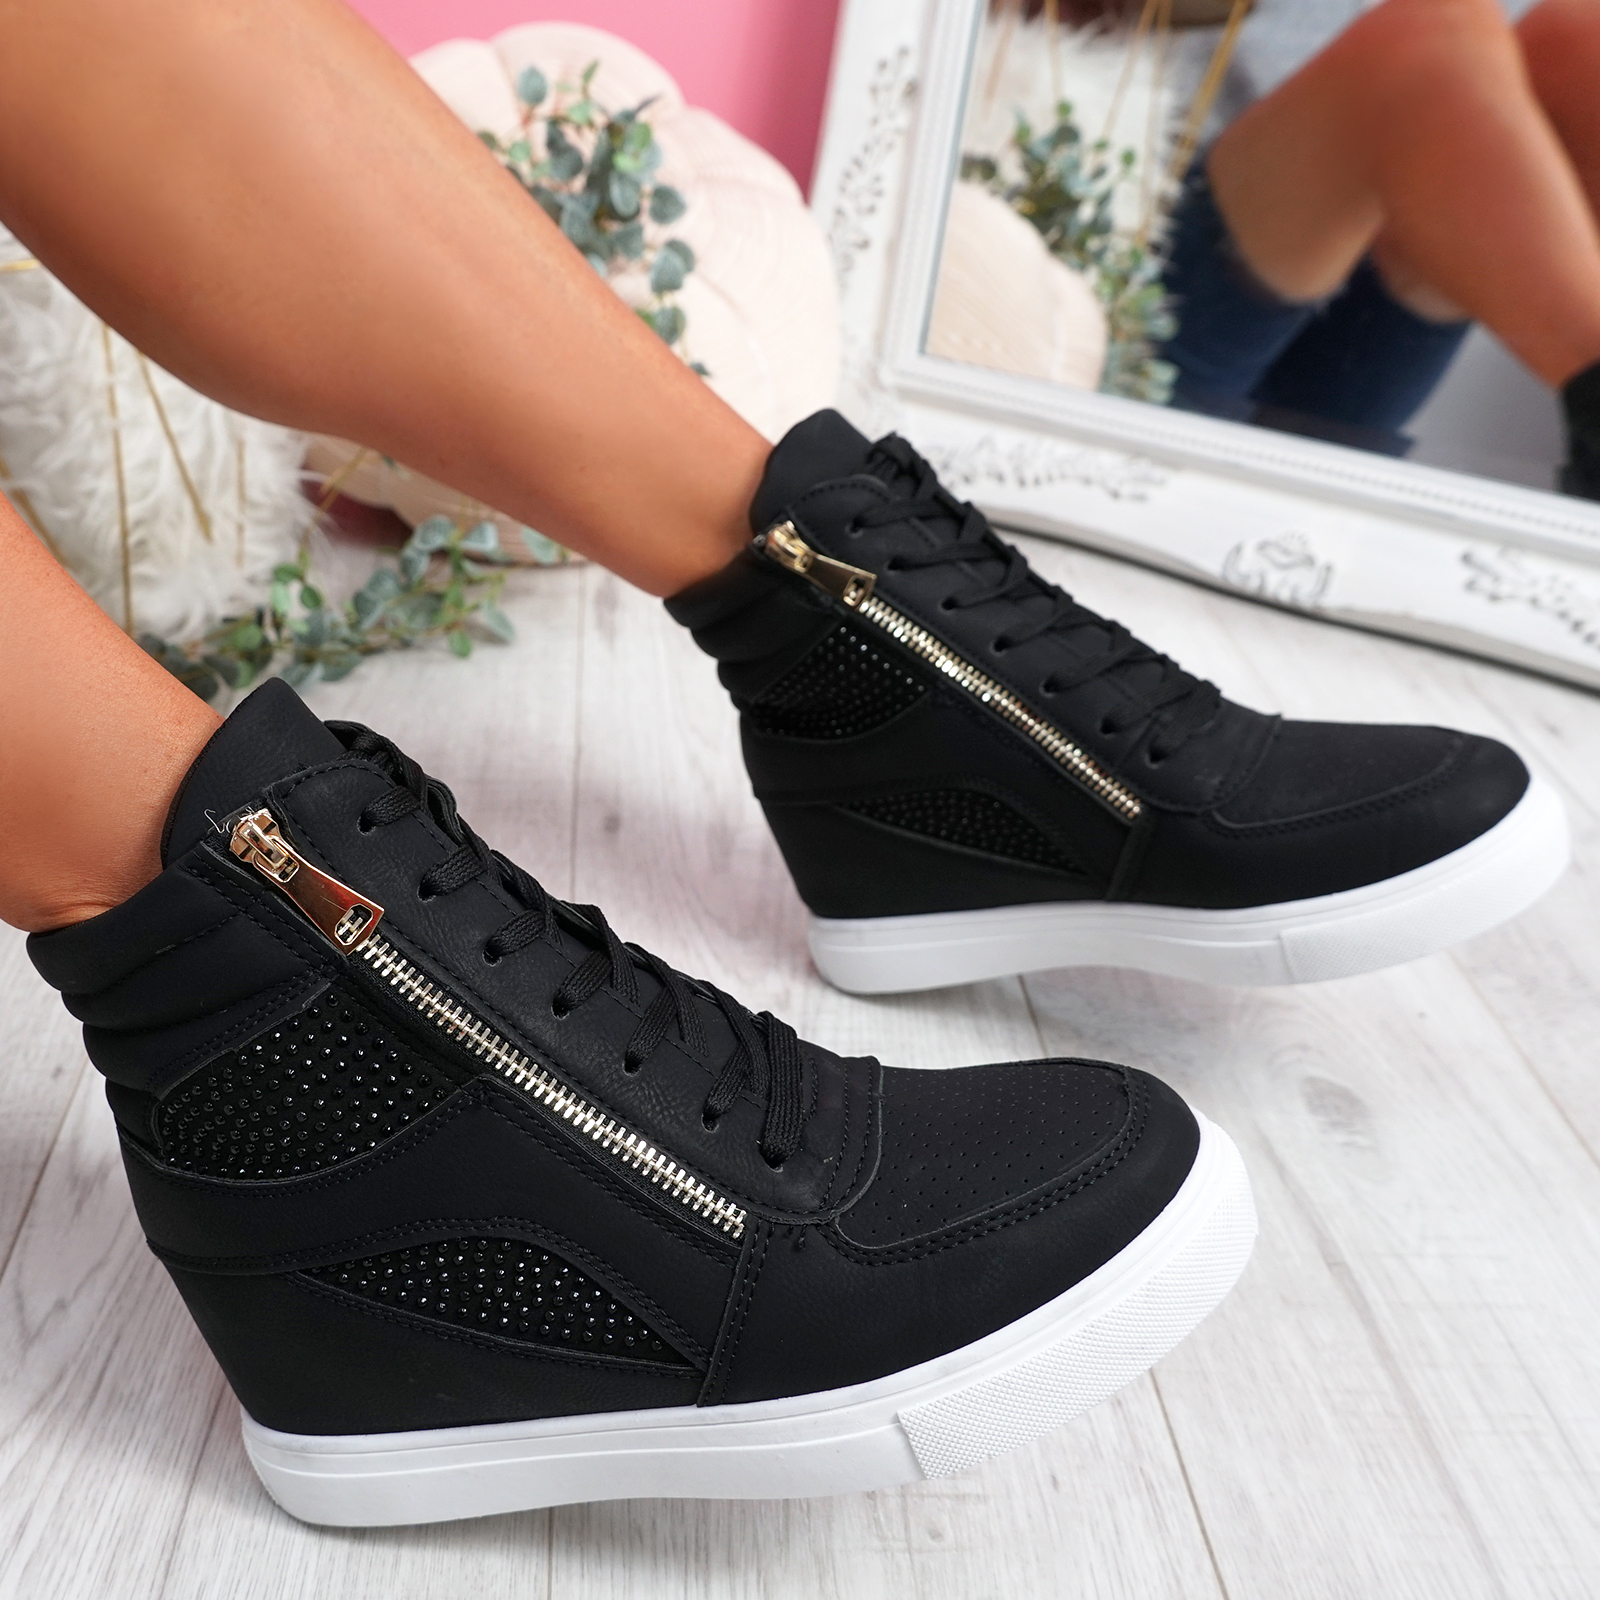 WOMENS LADIES ZIP STUDDED HIGH TOP ANKLE TRAINERS PARTY SNEAKERS WOMEN ...